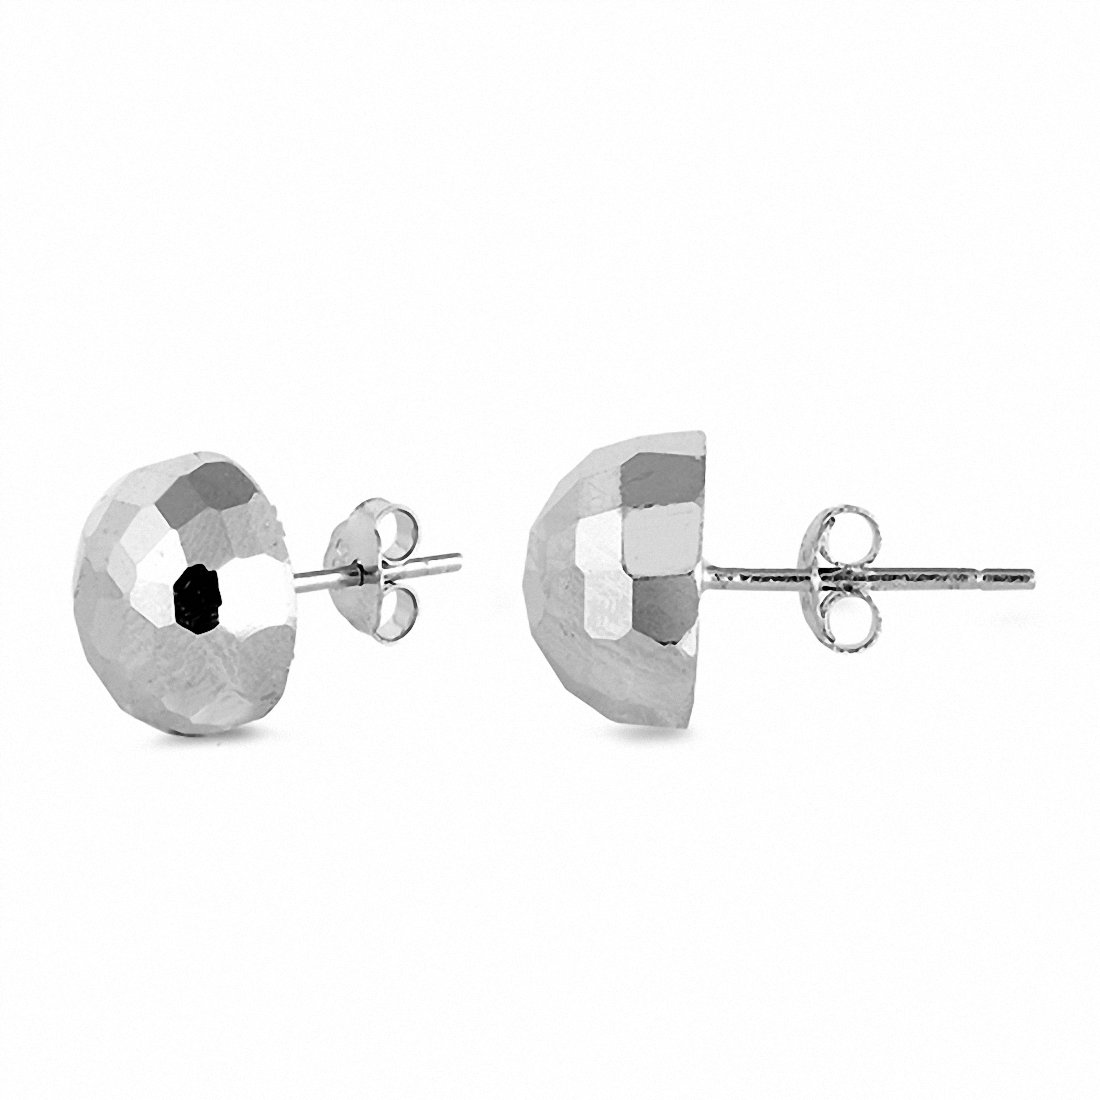 Half Ball Hammered Finish Stud Earrings 925 Sterling Silver (10mm)